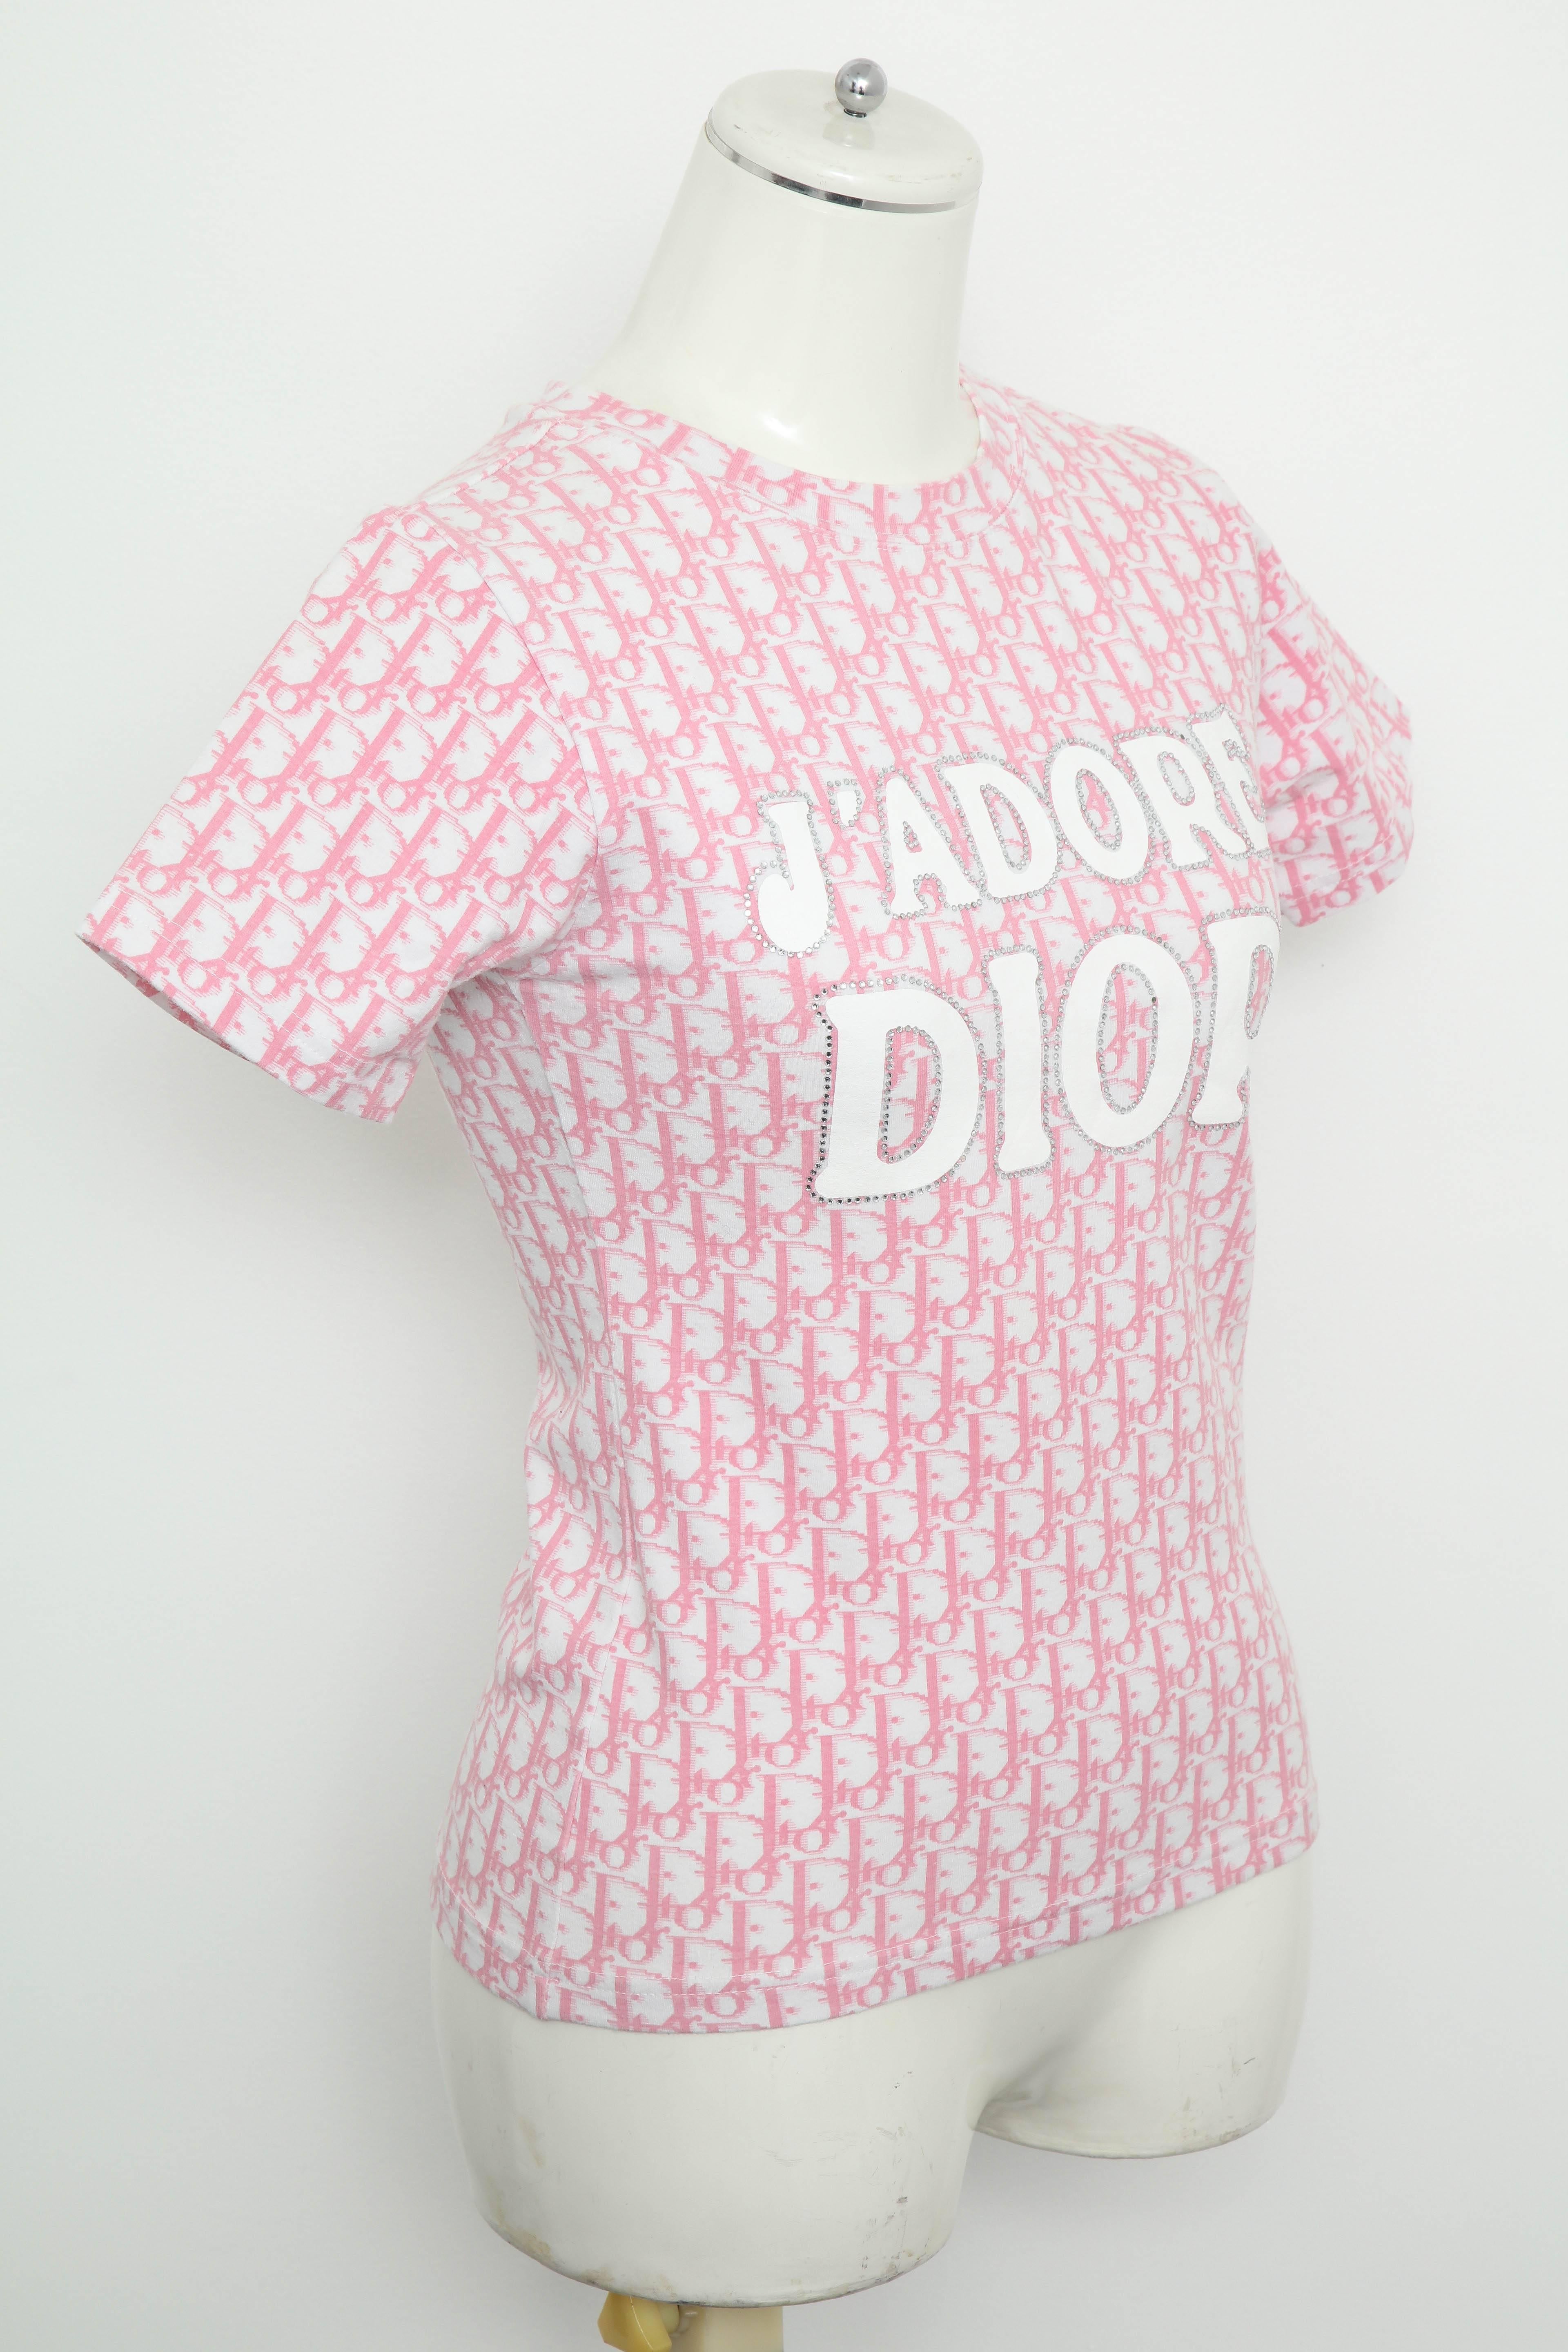 Christian Dior by John Galliano Pink Trotter Logo Shirt For Sale 2